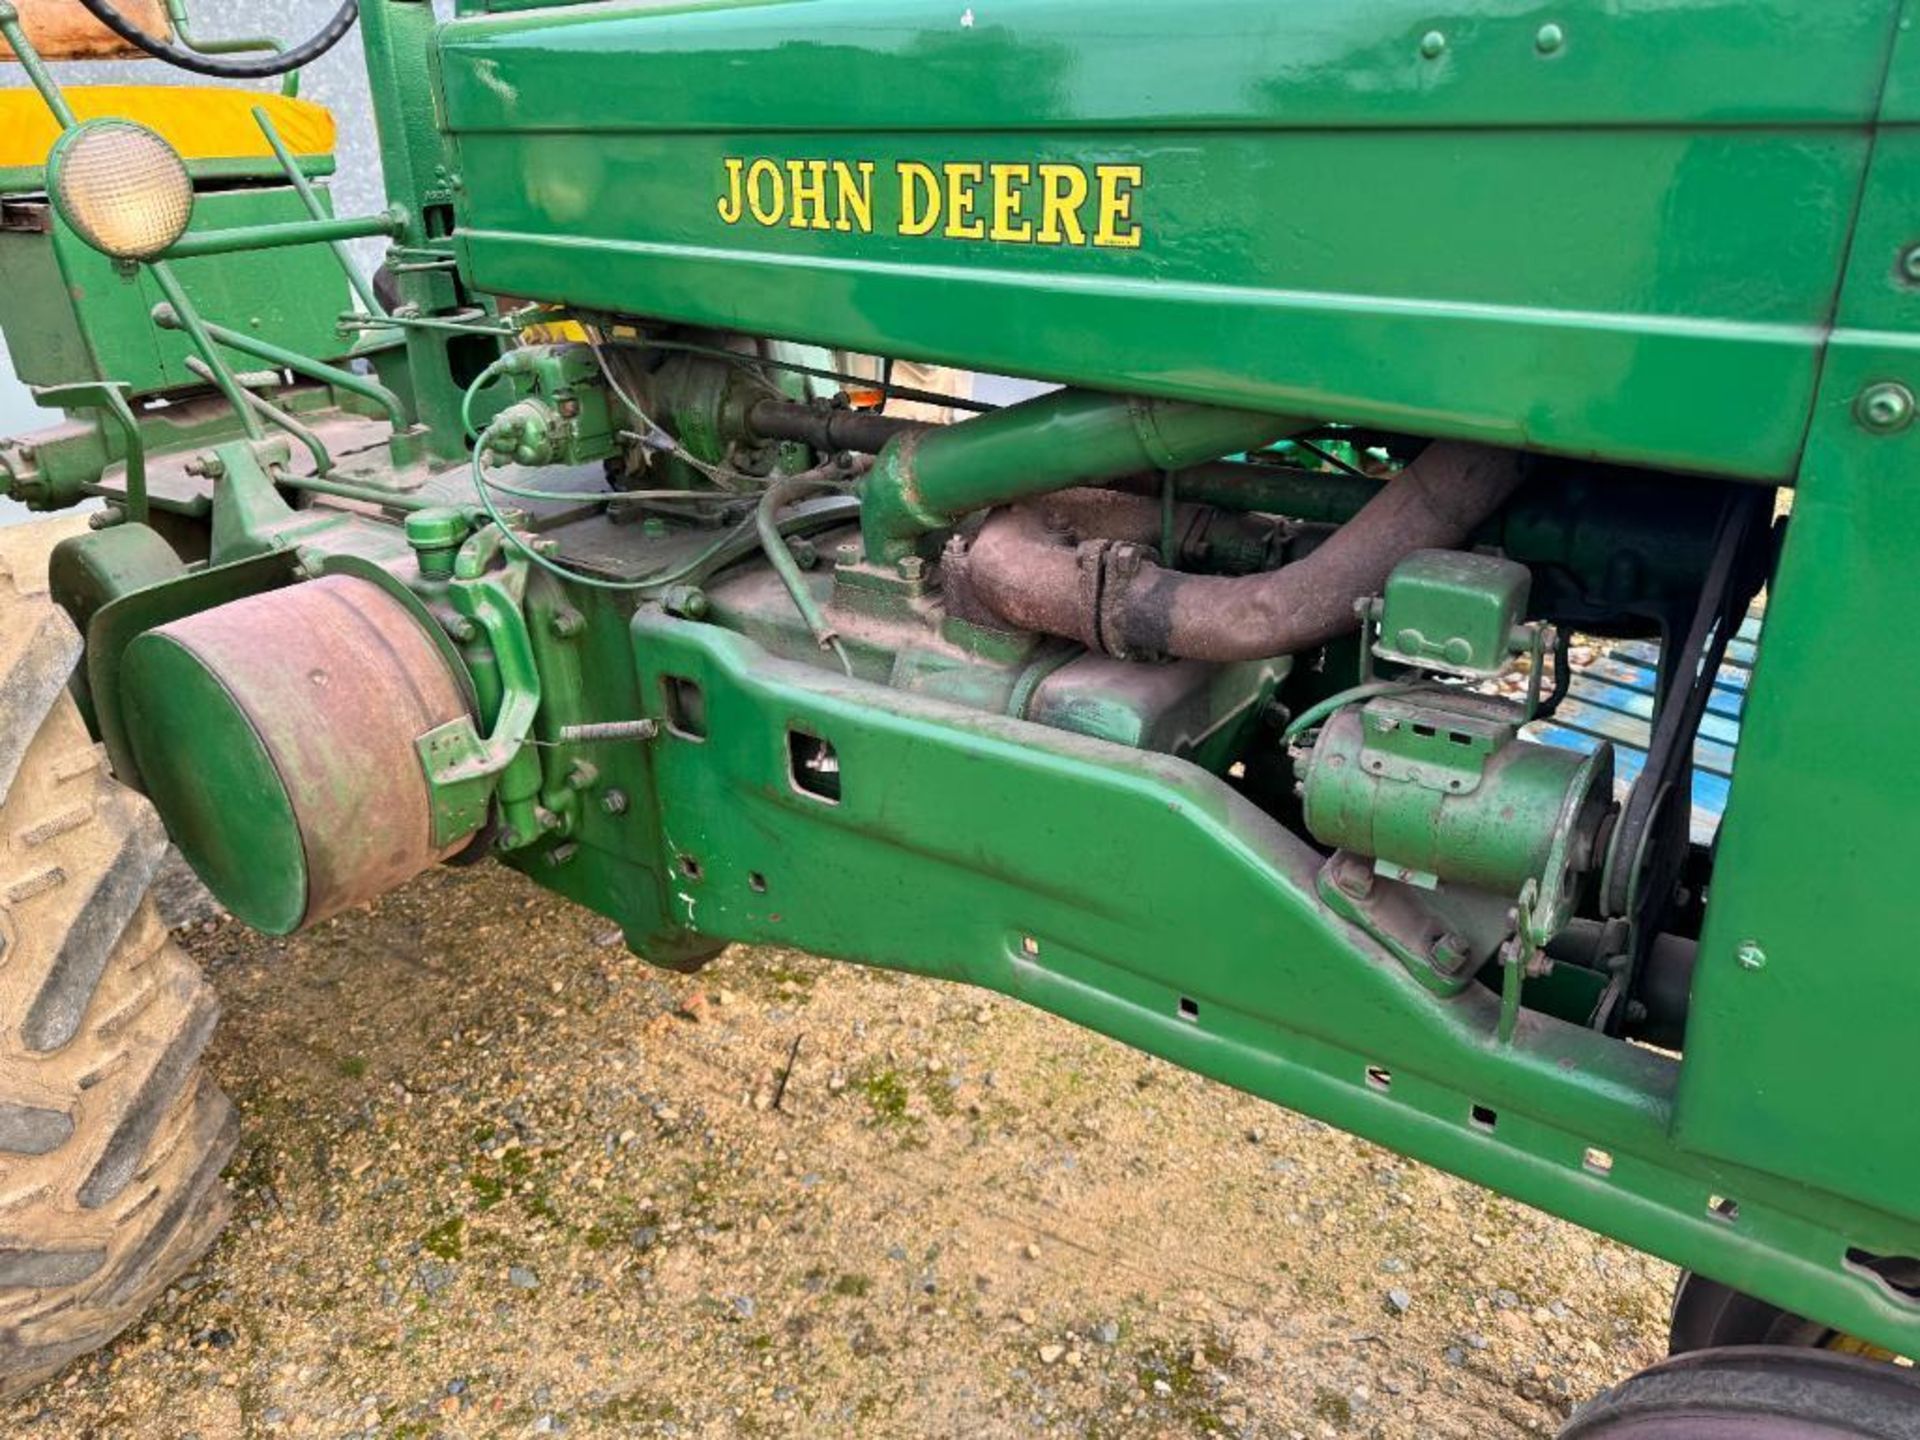 1948 John Deere Model A row crop tractor with side belt pulley, rear PTO and drawbar and twin front - Image 6 of 15